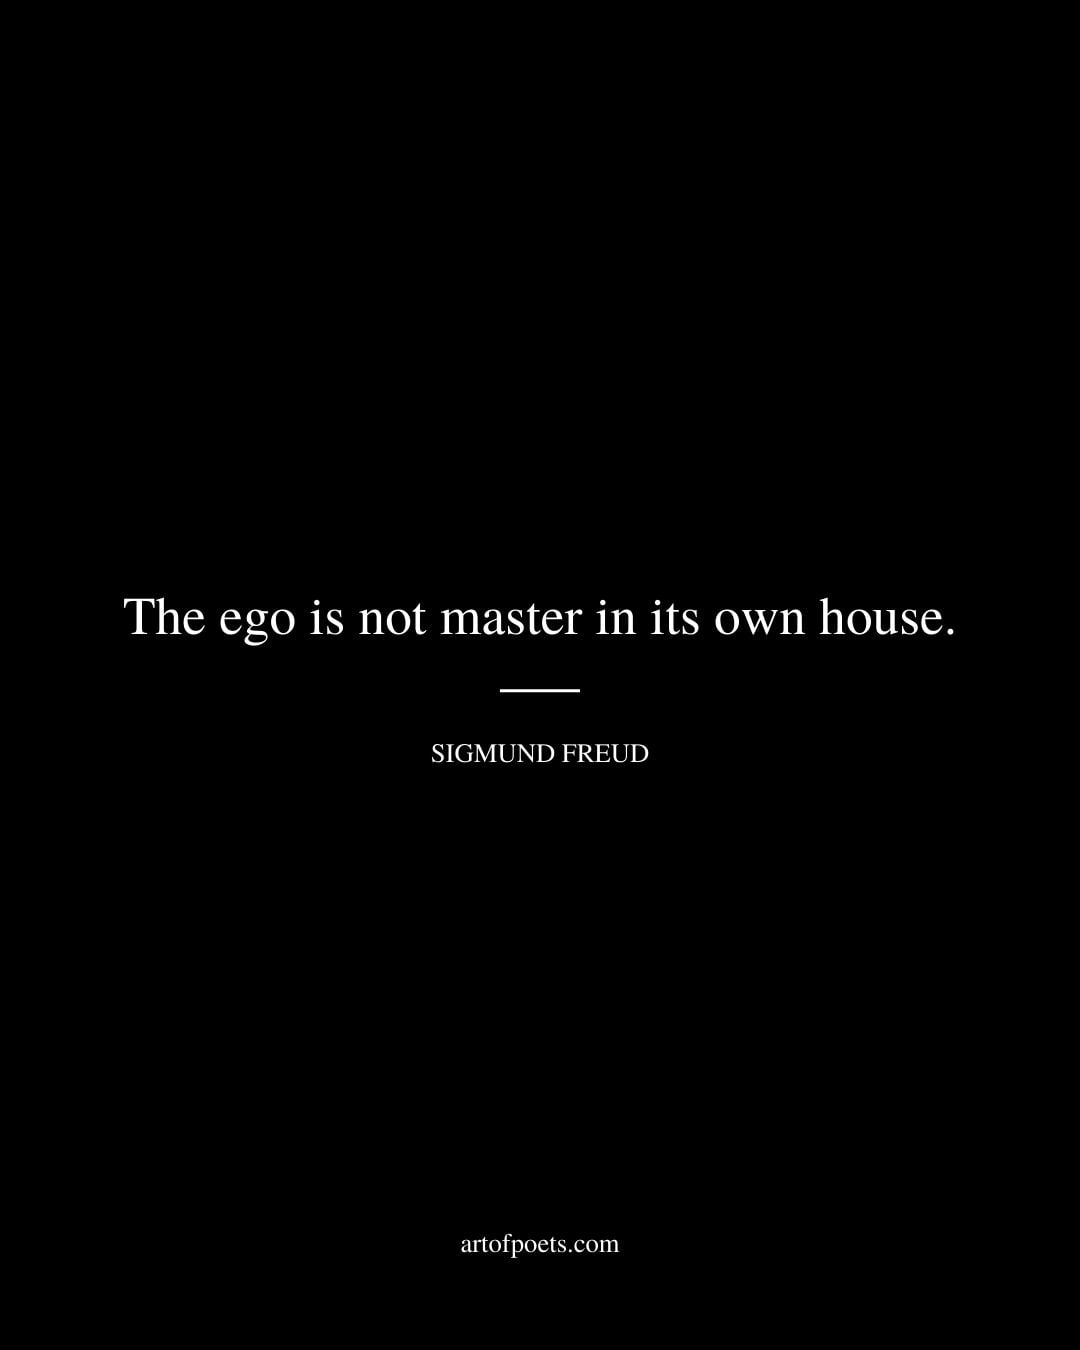 The ego is not master in its own house